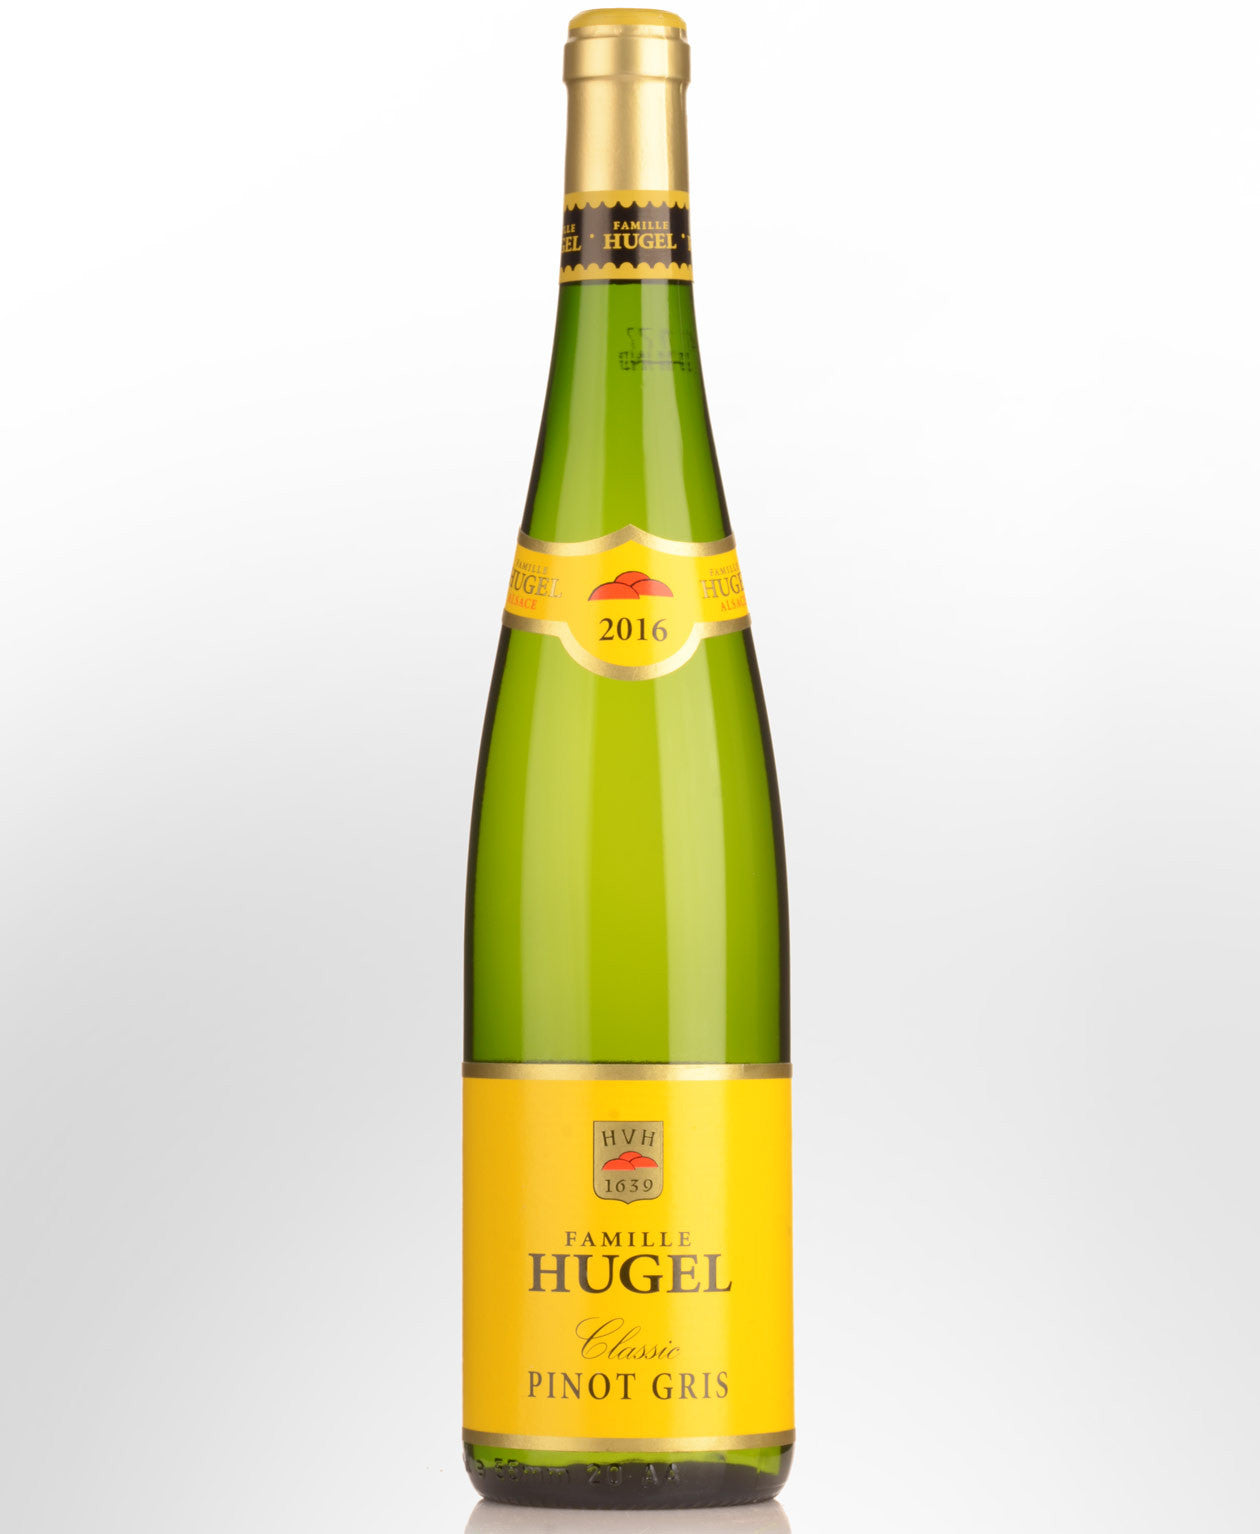 Famille Hugel Pinot Gris Classic 2019